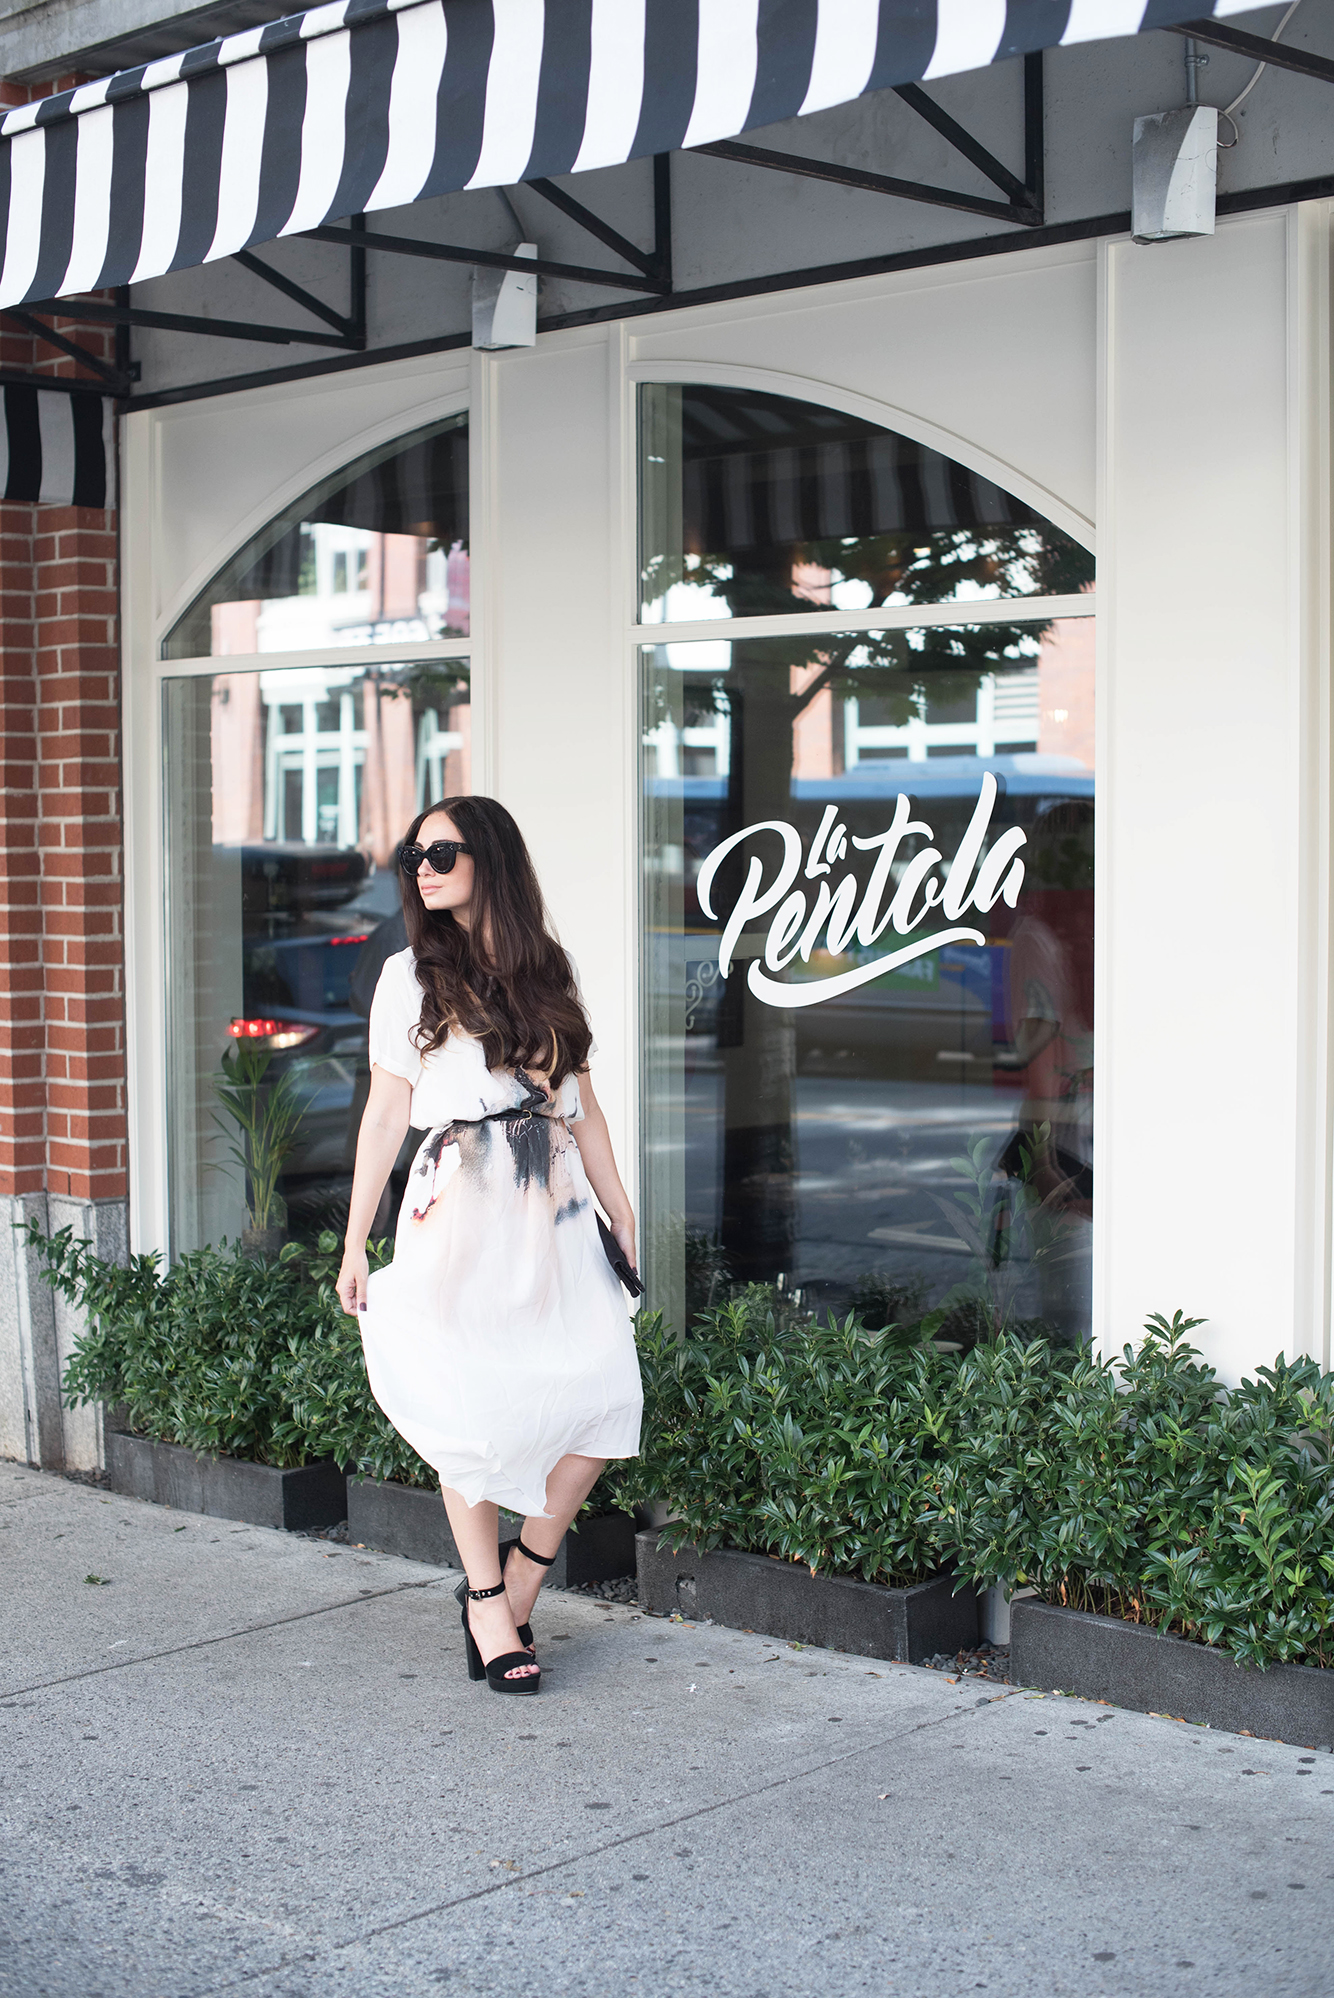 coco-and-vera-top-vancouver-style-blog-top-canadian-style-blog-top-blogger-street-style-dezzal-dress-celine-sunglasses-raye-sandals-sezane-clutch